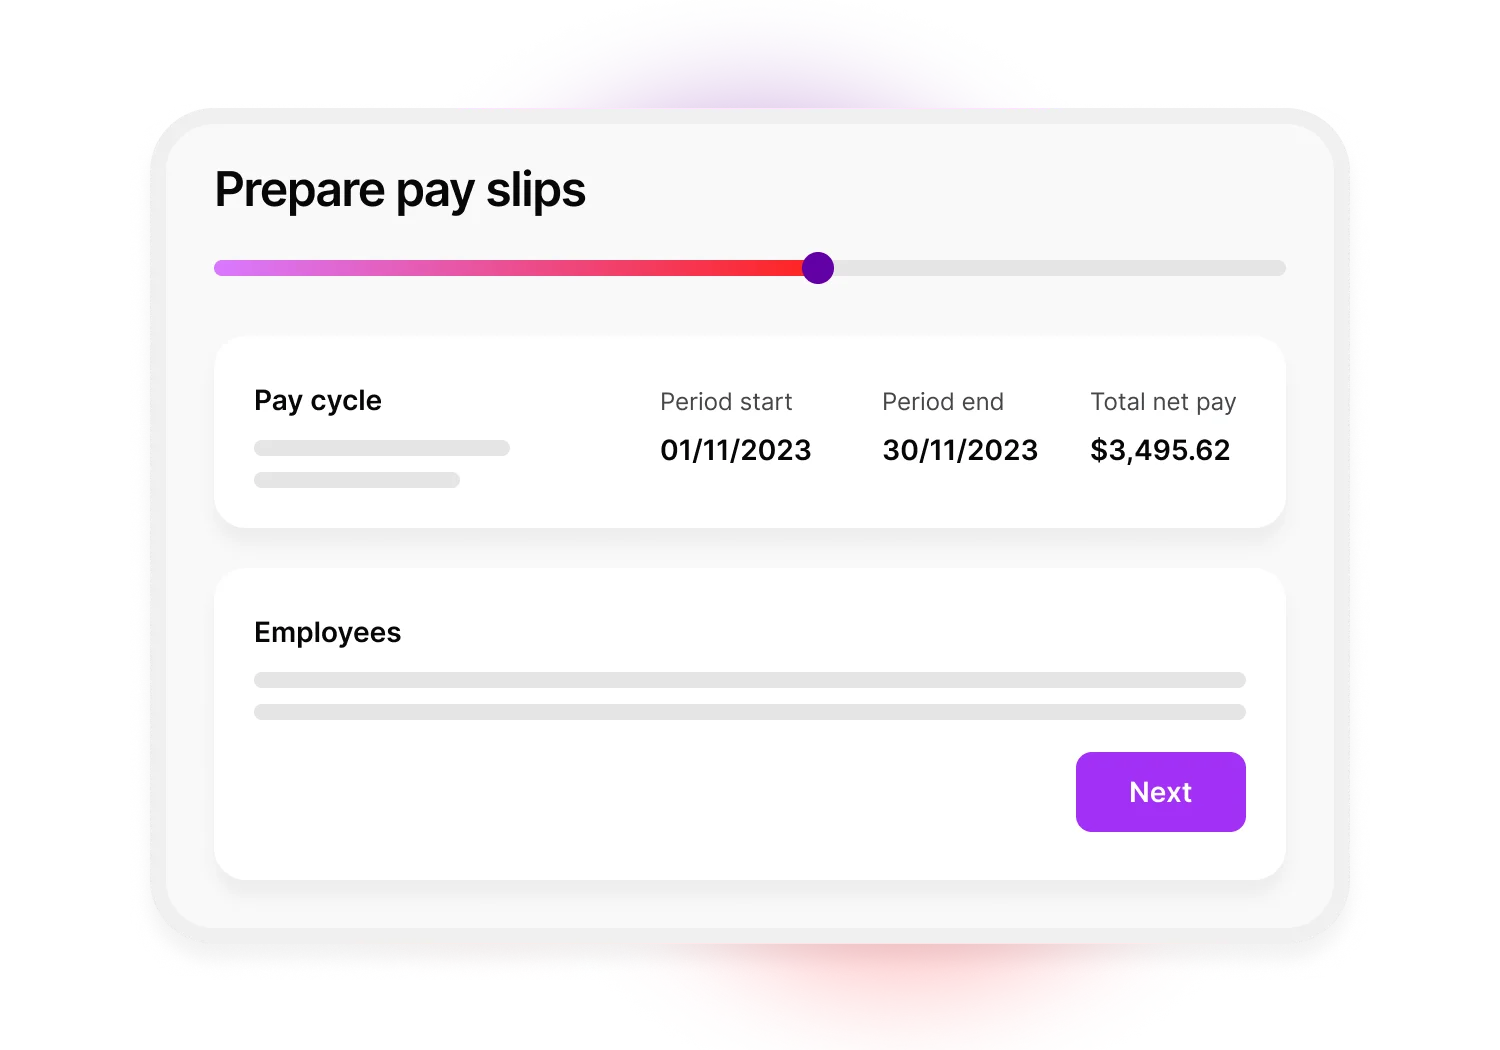 When finalising the pay run, at the prepare pay slips step, you'll see a summary of the pay cycle and the details for each employee in one screen. This means you can easily review all the details in one place and feel confident before clicking 'next'.